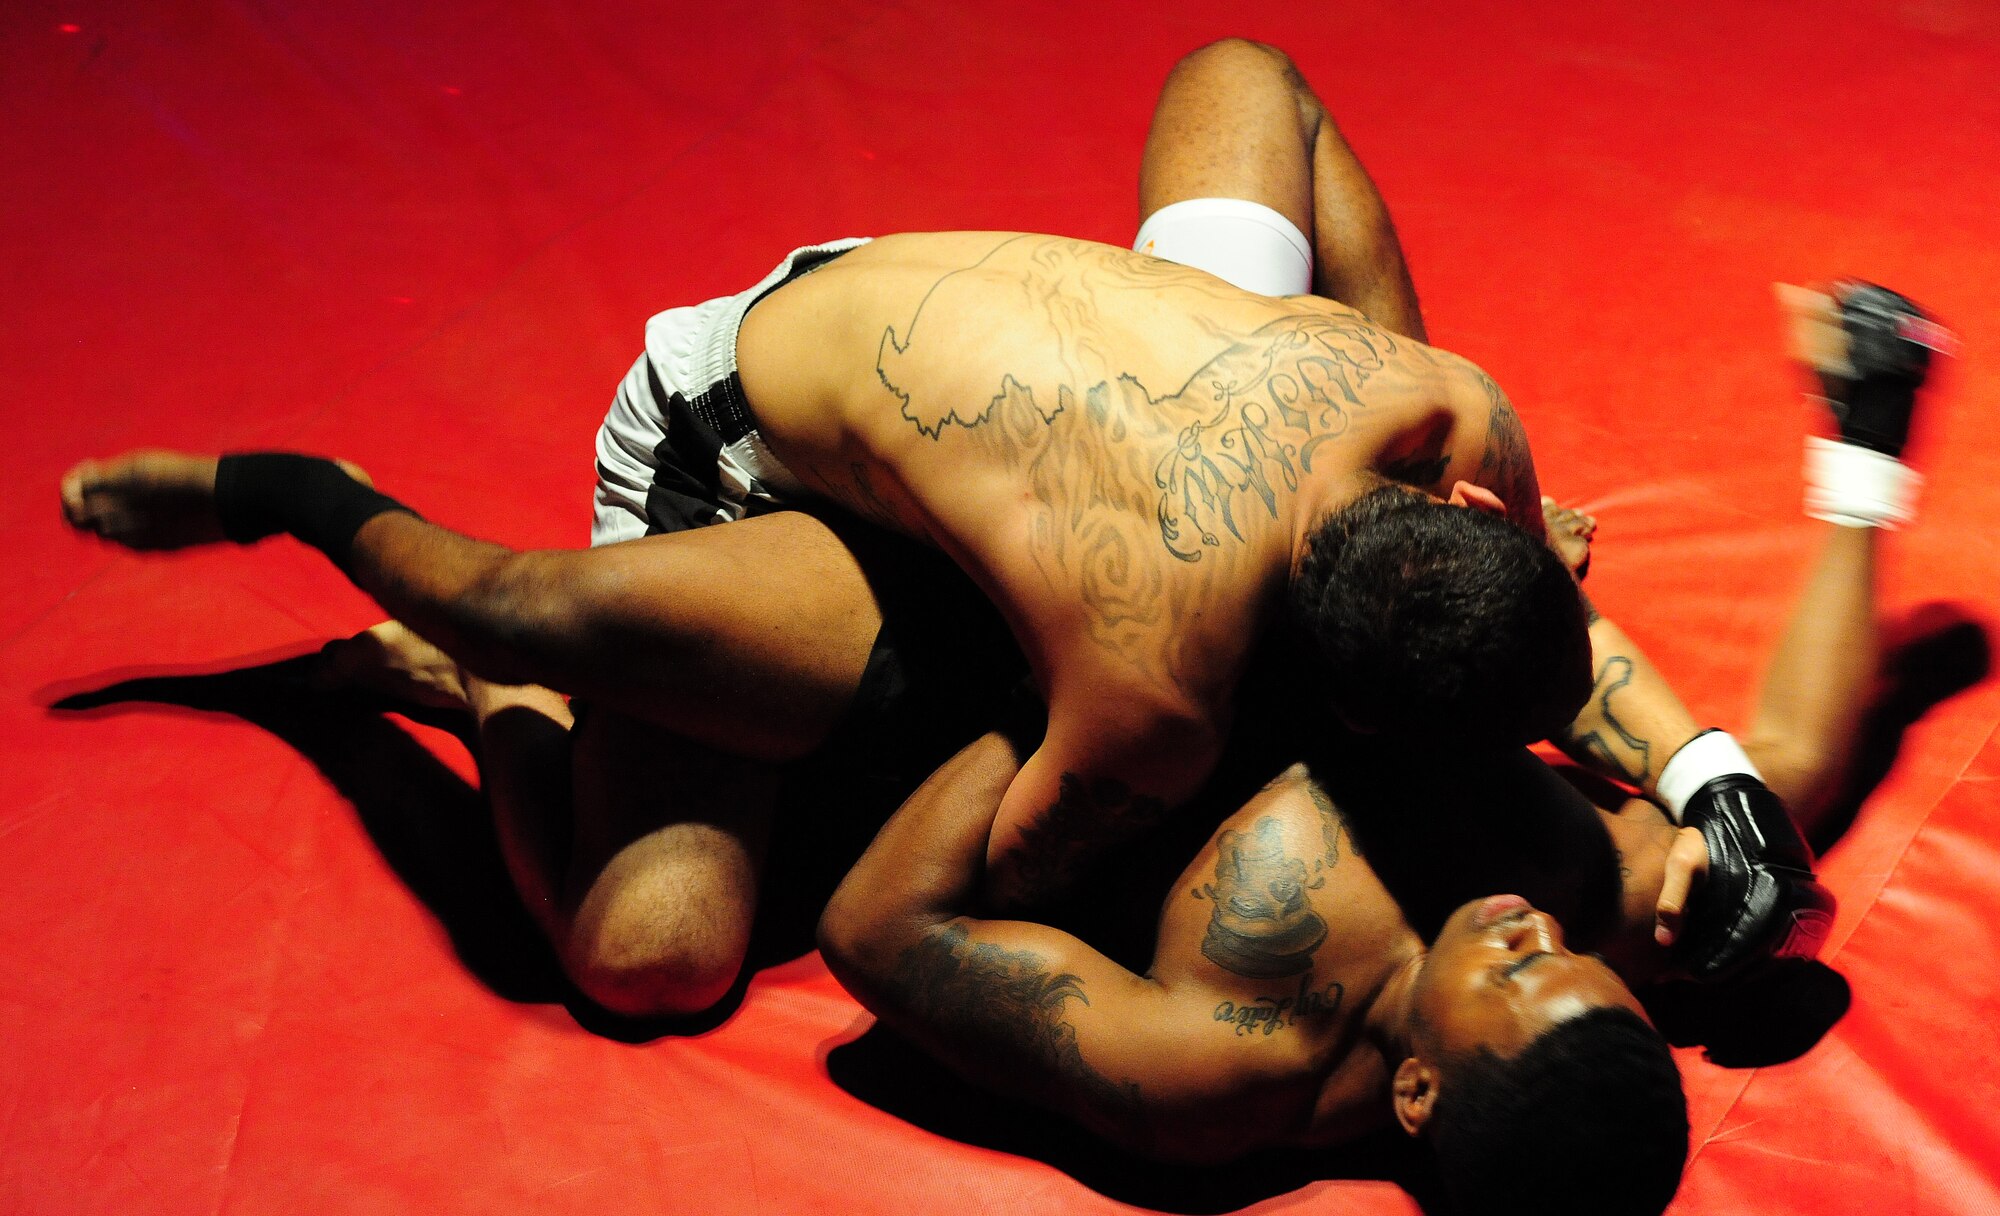 Steven Dickerson, bottom, 509th Maintenance Squadron low observable structural maintenance technician, throws punches to the face of Chalen Chaney during an amateur mixed martial arts match at Bottoms Up in Sedalia, Mo., May 18, 2013. Mixed martial arts is a full-contact sport allowing the use of striking and grappling techniques, and the only way to win is by knockout or tapout. (U.S. Air Force photo by Staff Sgt. Nick Wilson/Released)